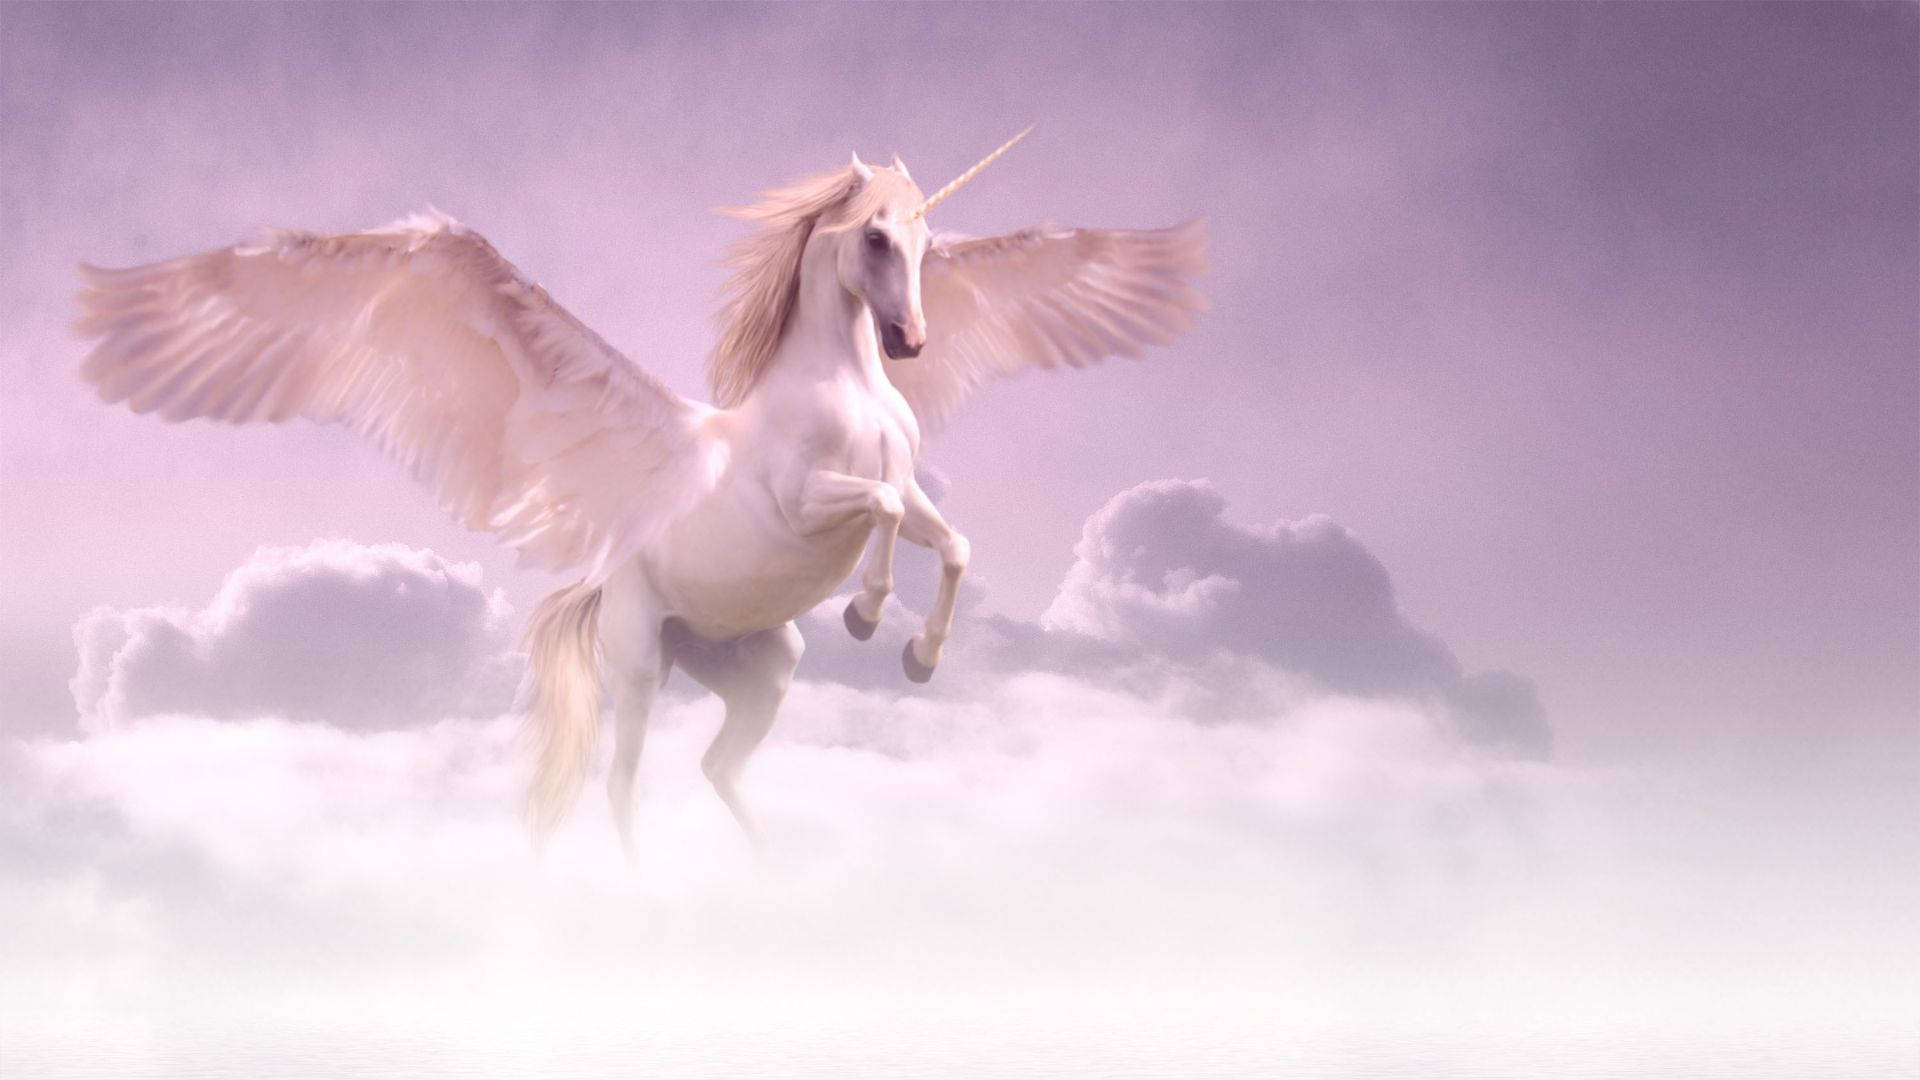 Make a Splash with this Cool Unicorn! Wallpaper